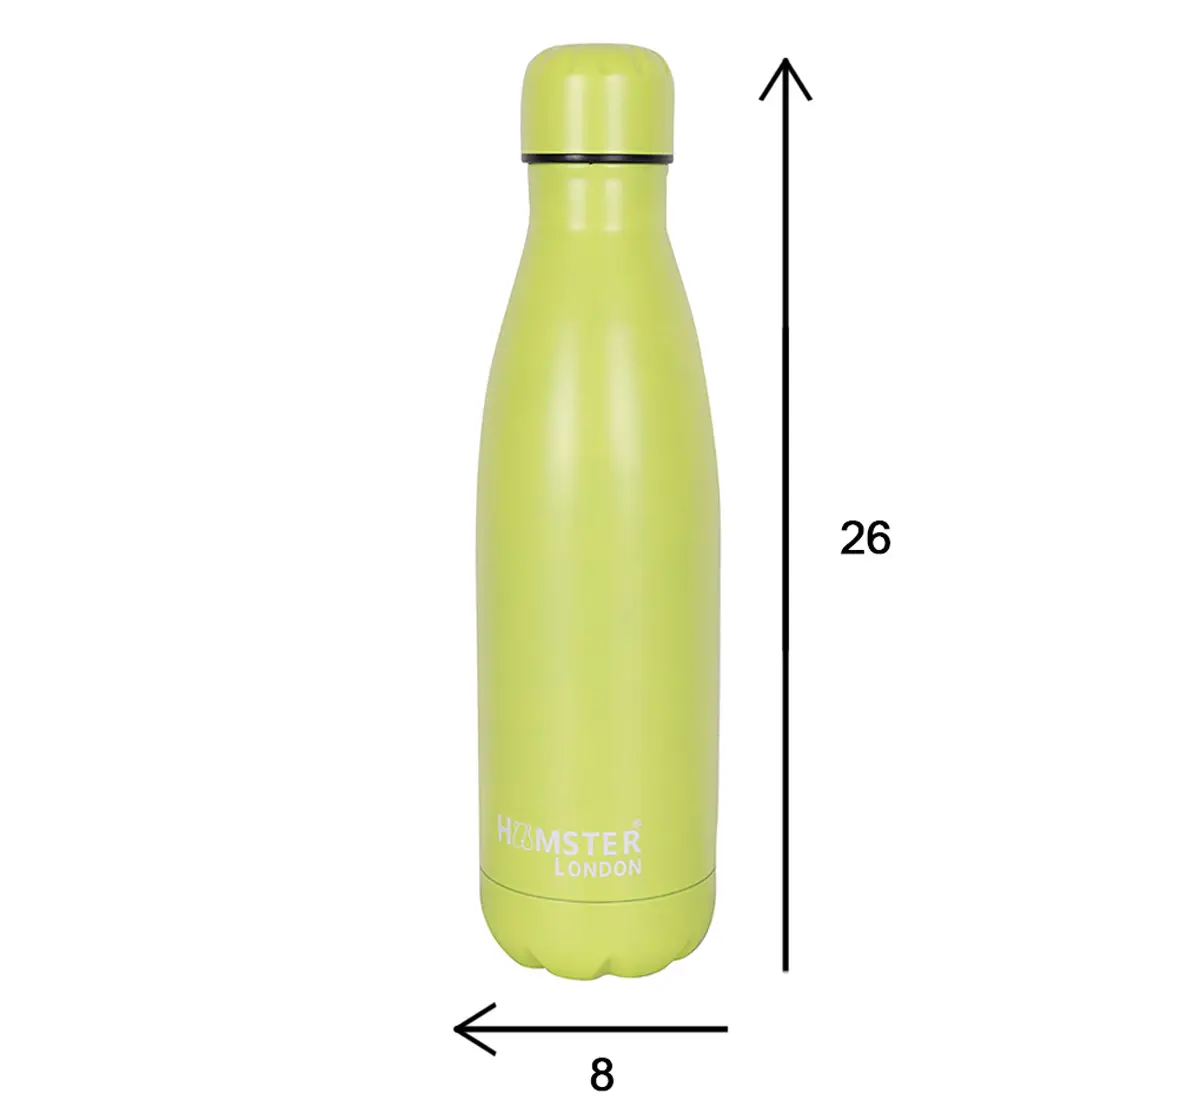 Stainless Steel Insulated Water Bottle by Hamster London for Kids, Yellow, Non-Toxic, BPA Free, 500ml, 5Y+